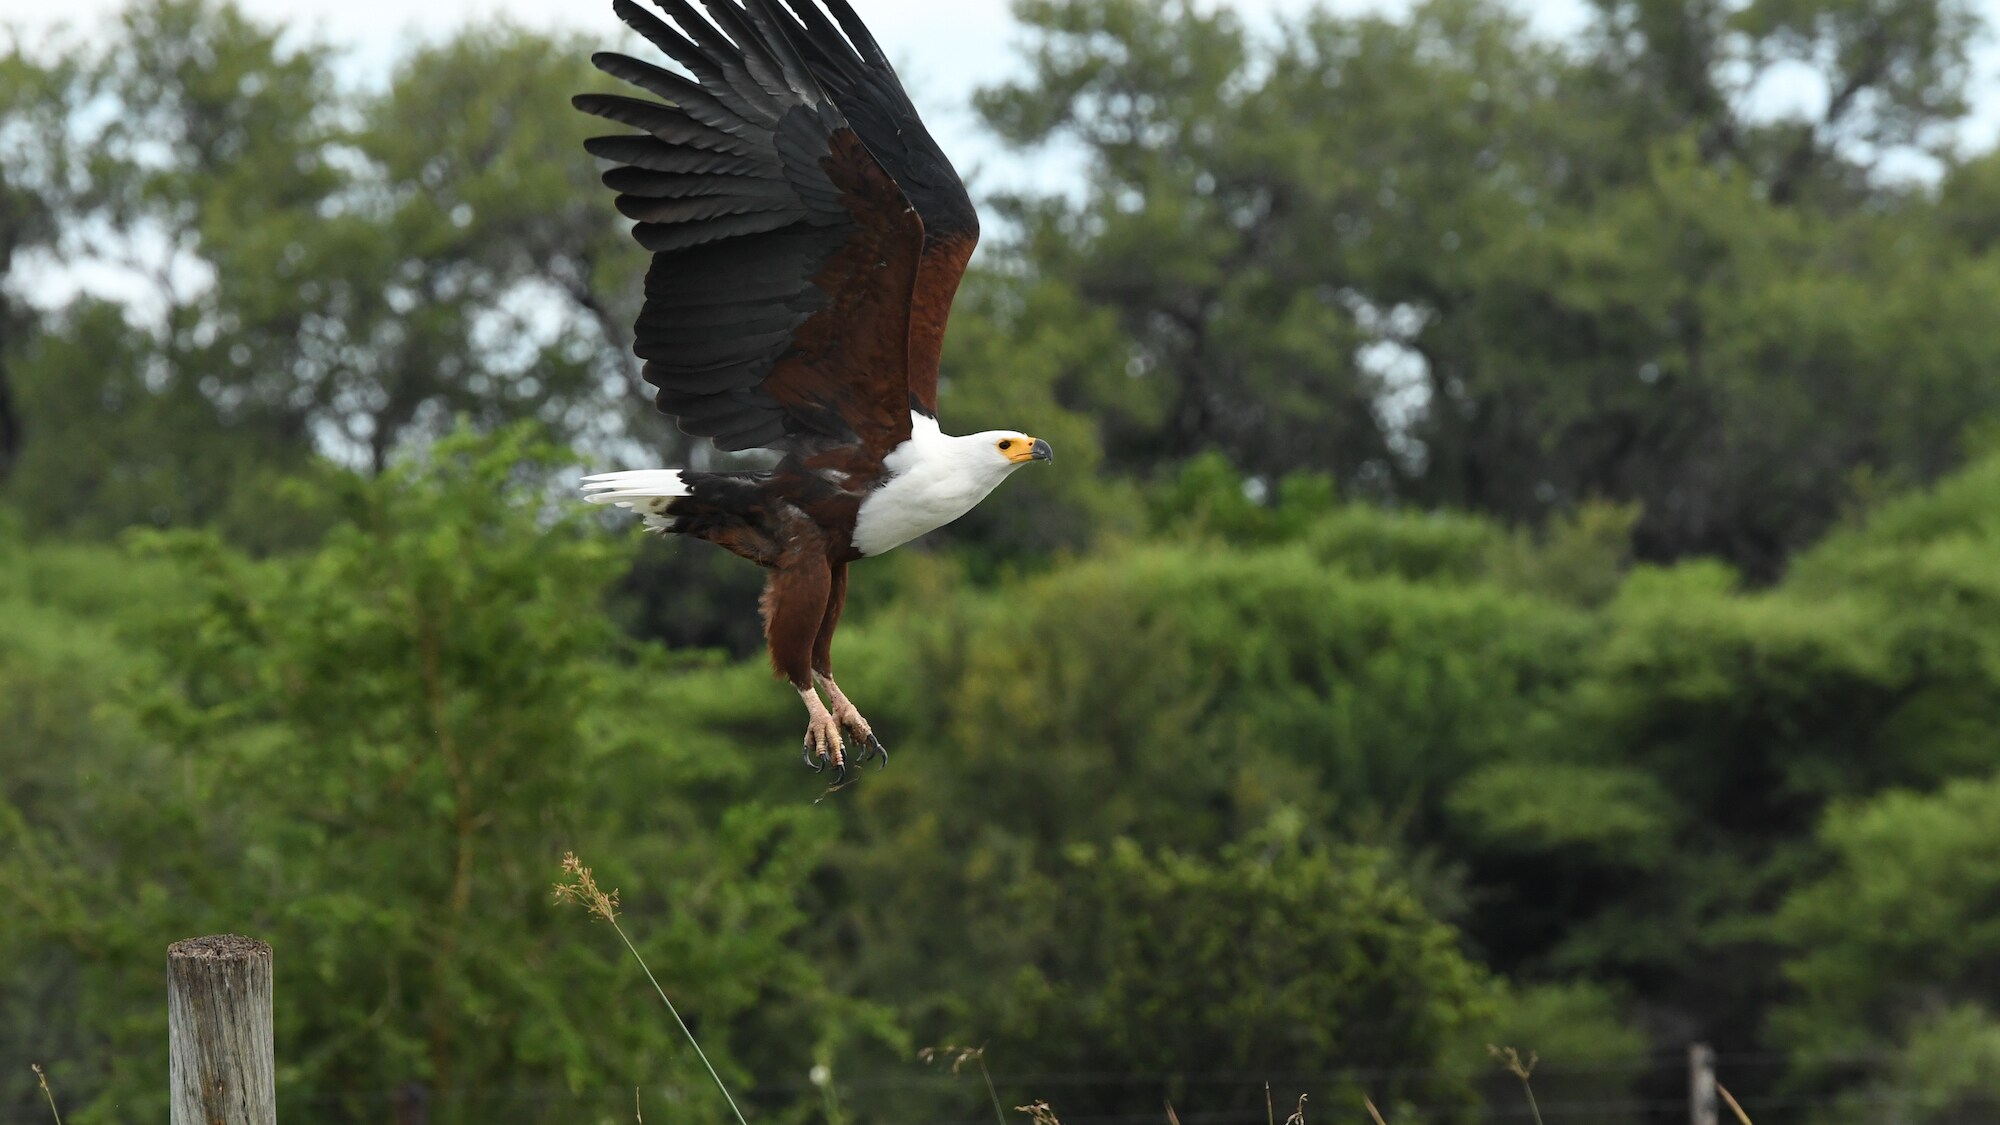 African fish eagle in flight. (National Geographic for Disney+/Joe Hope)